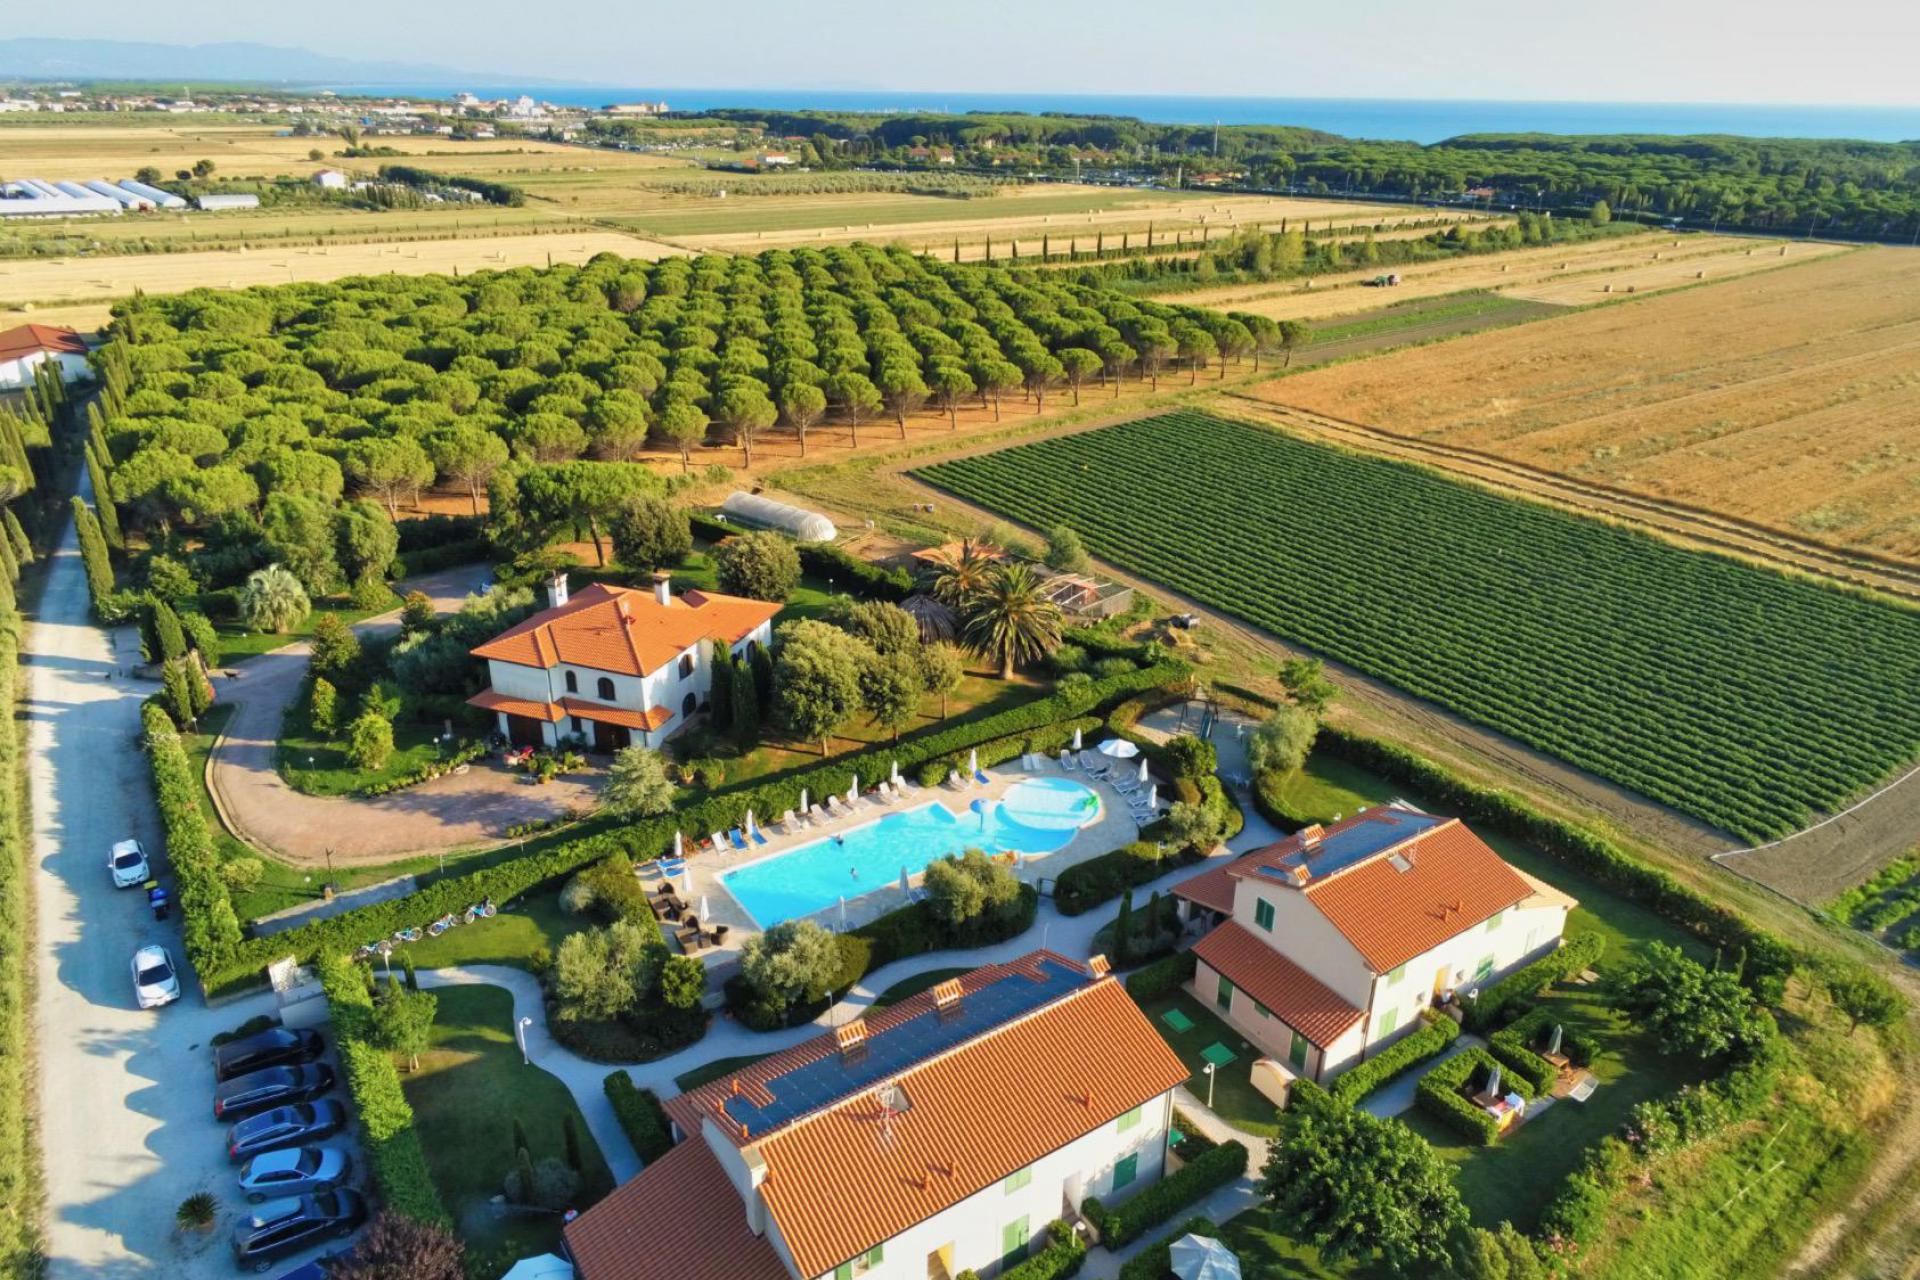 Agriturismo within walking distance of the sea